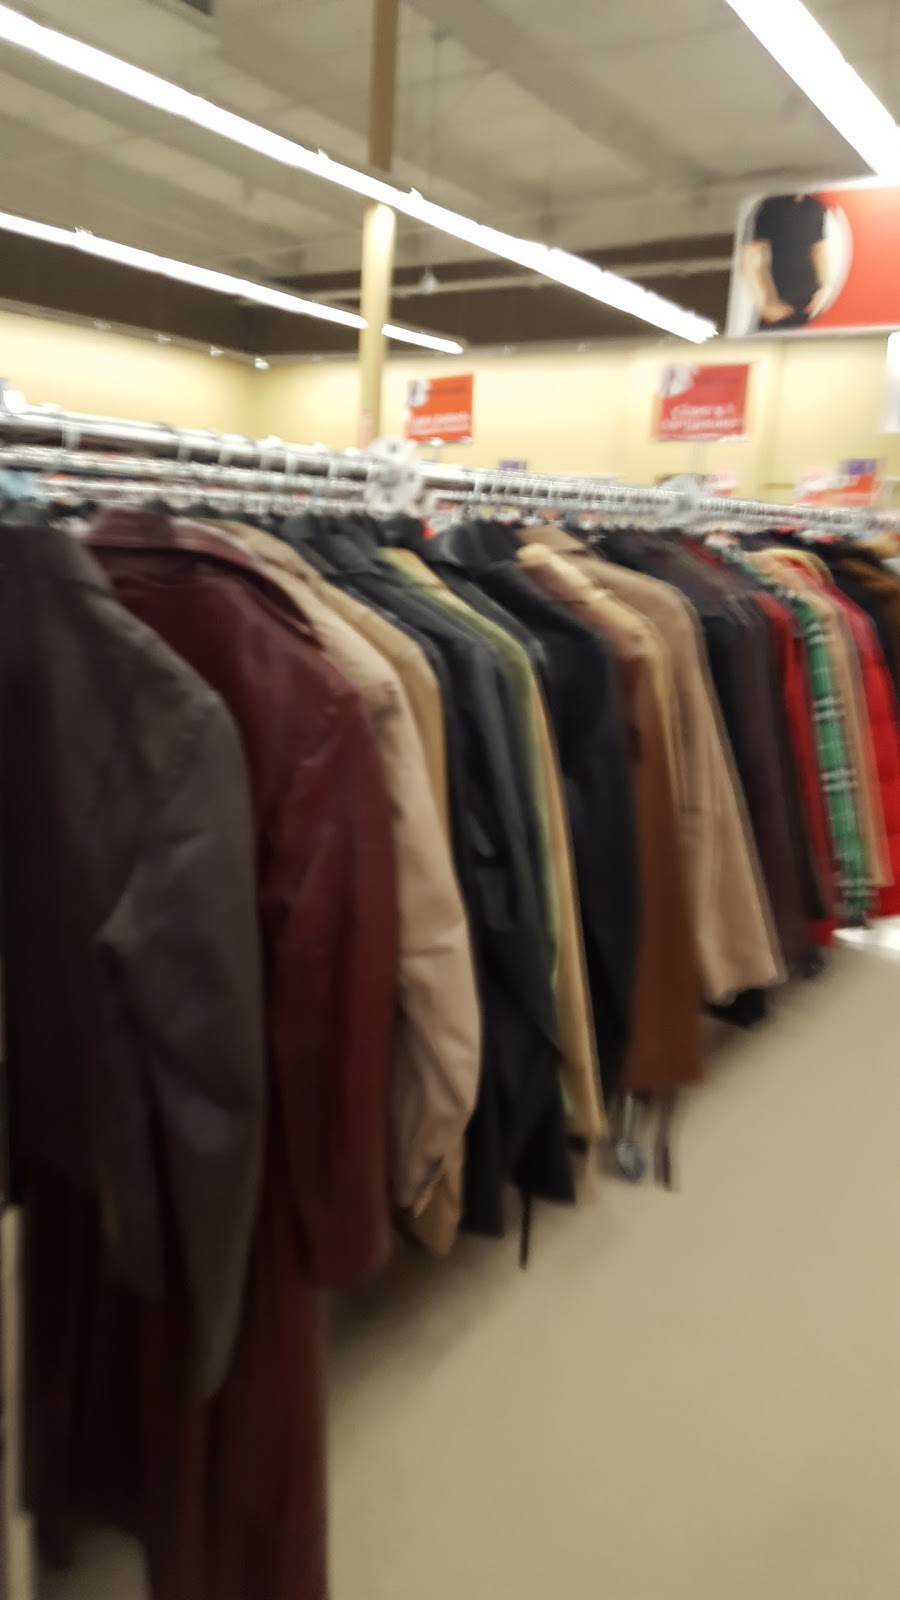 Savers | 154 Browns Valley Pkwy, Vacaville, CA 95688 | Phone: (707) 448-8760